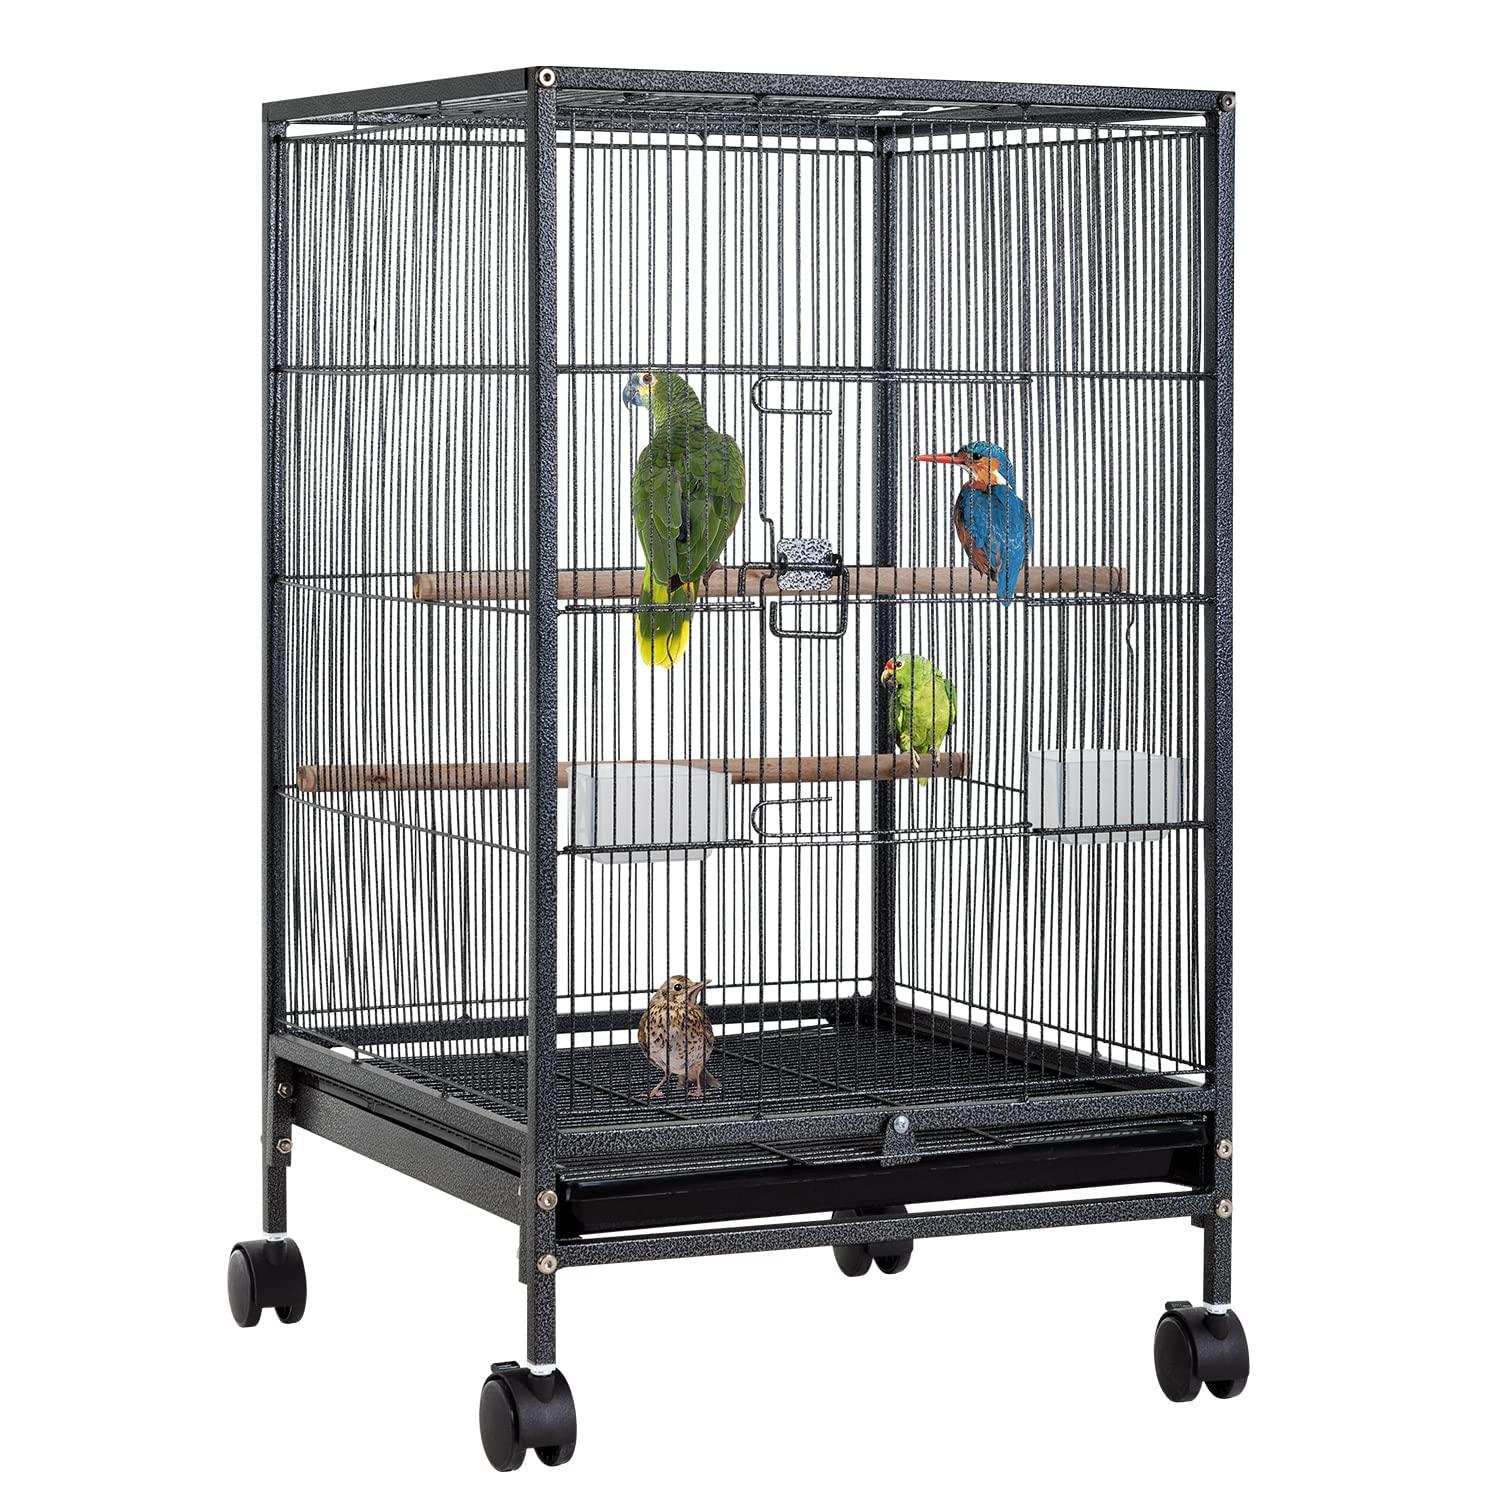 bestpet 35 inch 53 inch wrought iron bird cage with play open top and rolling stand,large parrot cage bird cages for parakeet